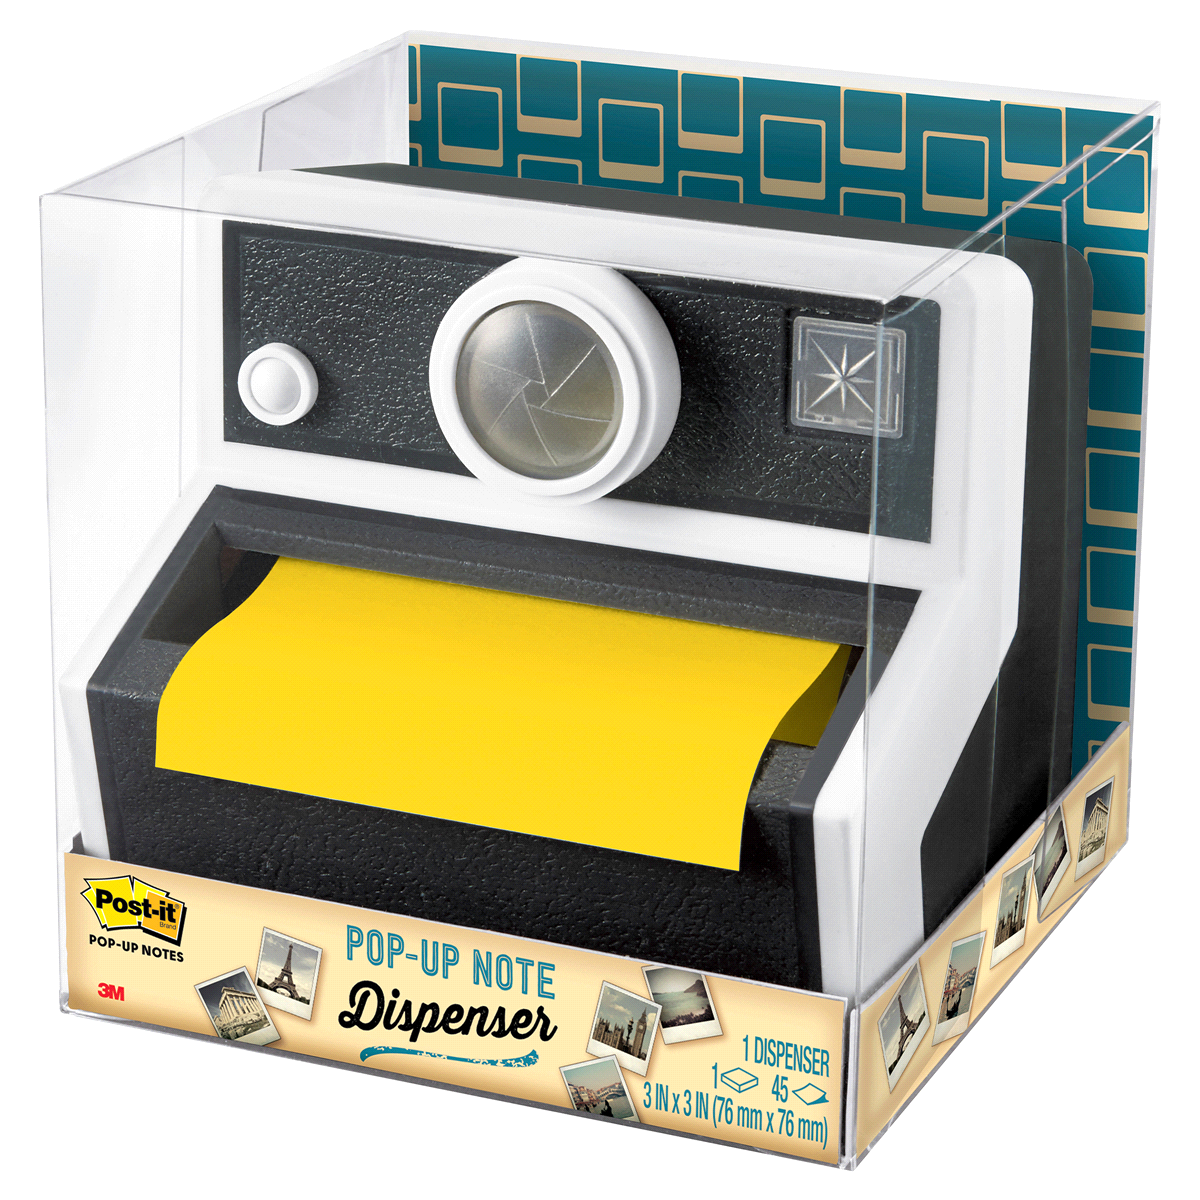 slide 3 of 5, Post-it Pop-up Notes Dispenser for 3 in x 3 in Notes, Black, Camera-shaped Dispenser, 1 Dispenser and 45 Sheet Pad/Pack, 1 ct